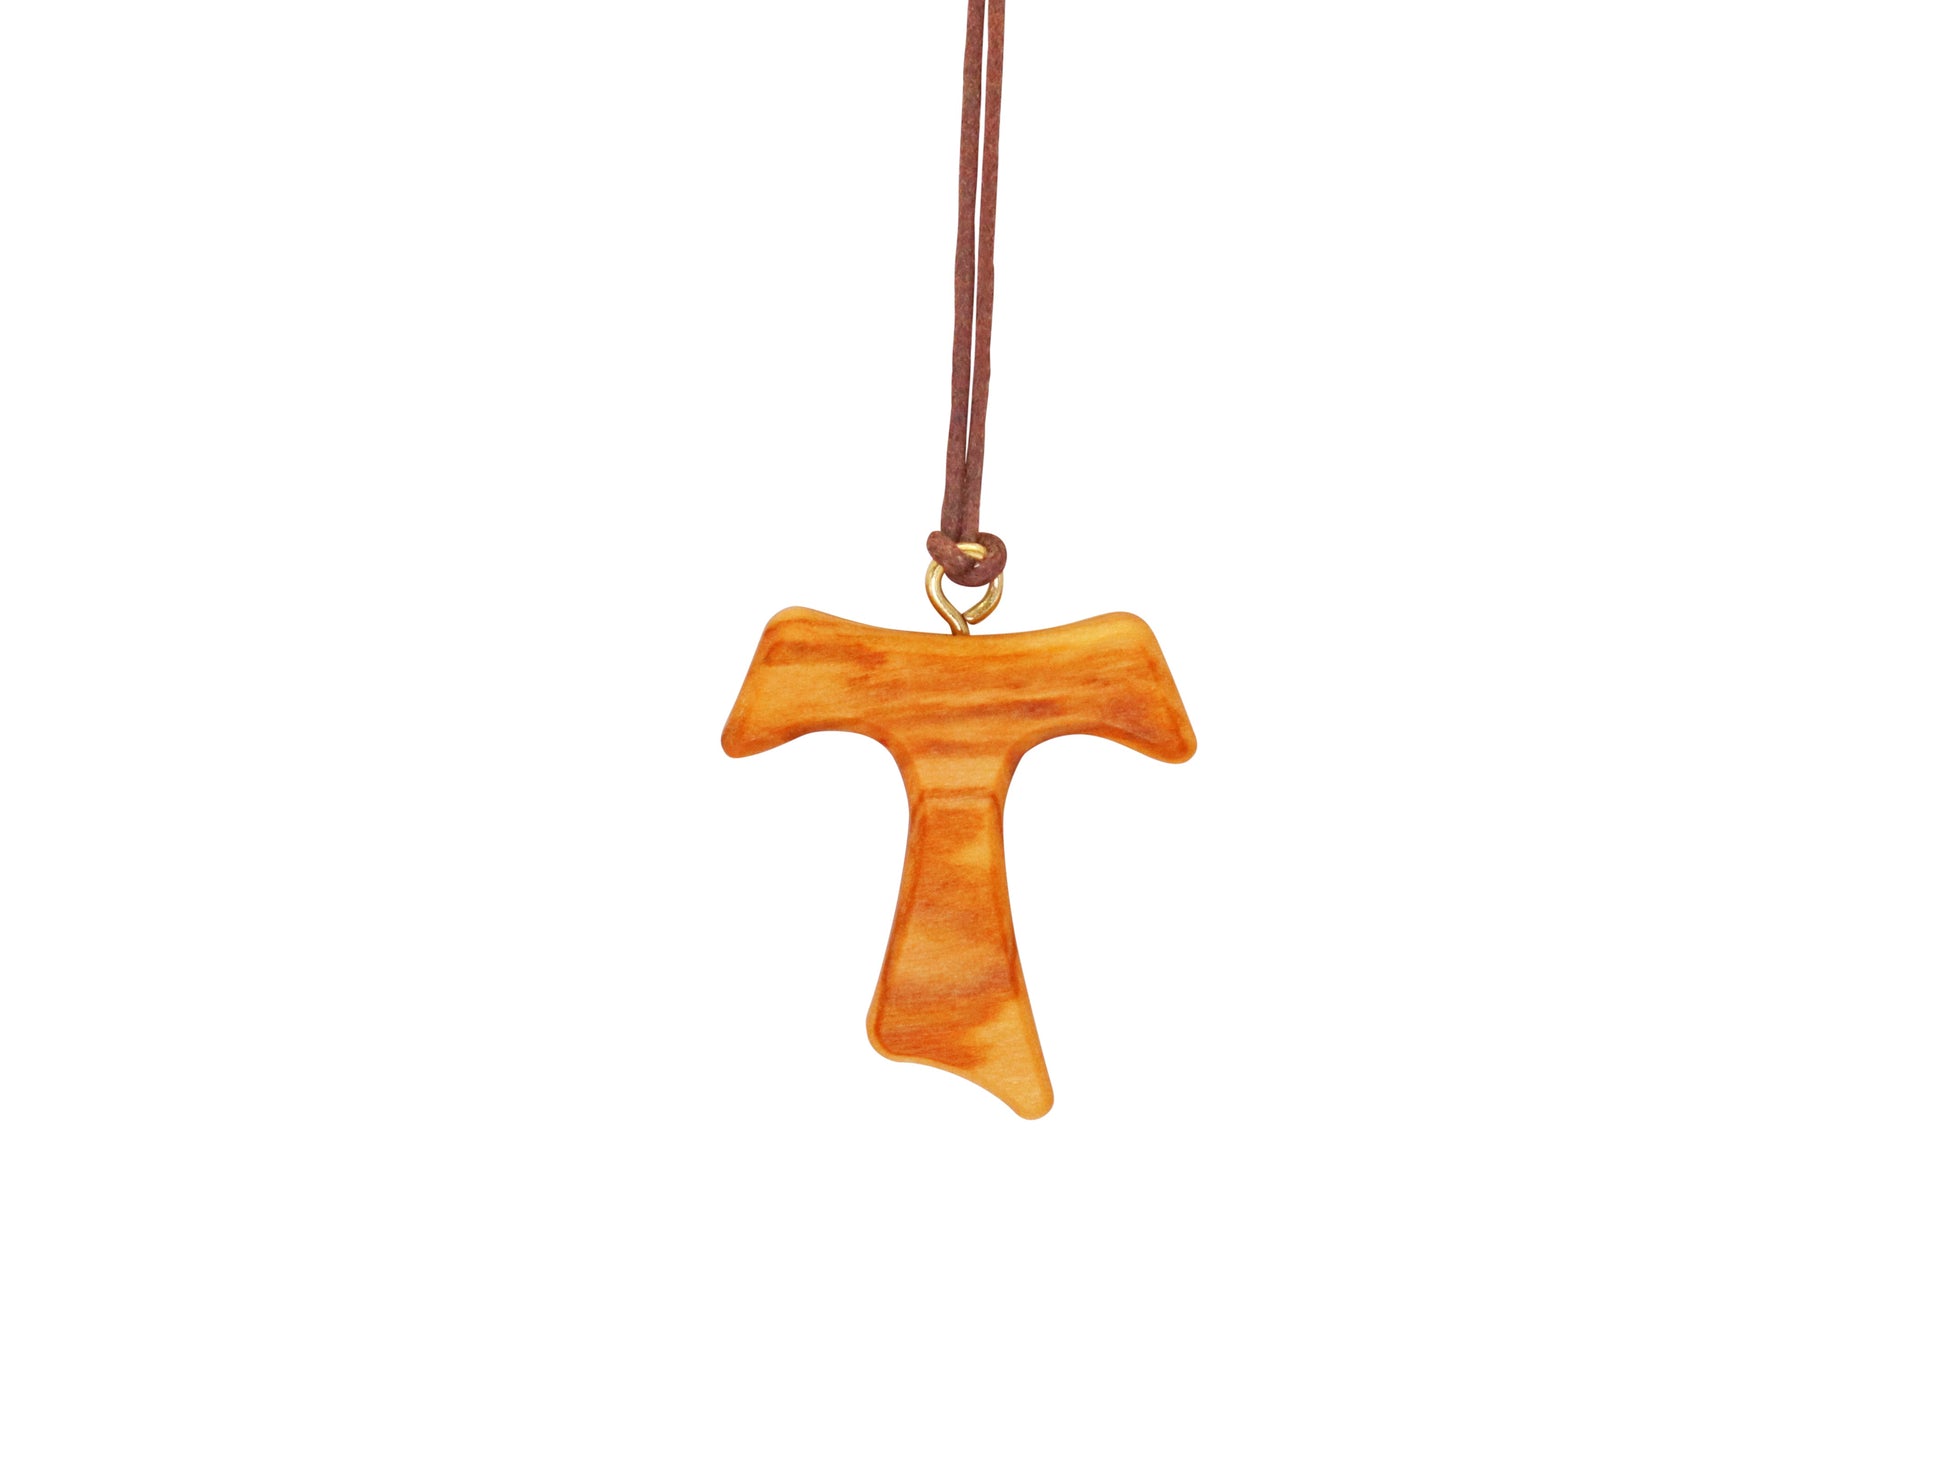 Tau cross pendant made from olive wood, featuring a T-shaped design with expanded ends, hanging on a soft cotton cord, handcrafted by Christian families in the Holy Land.